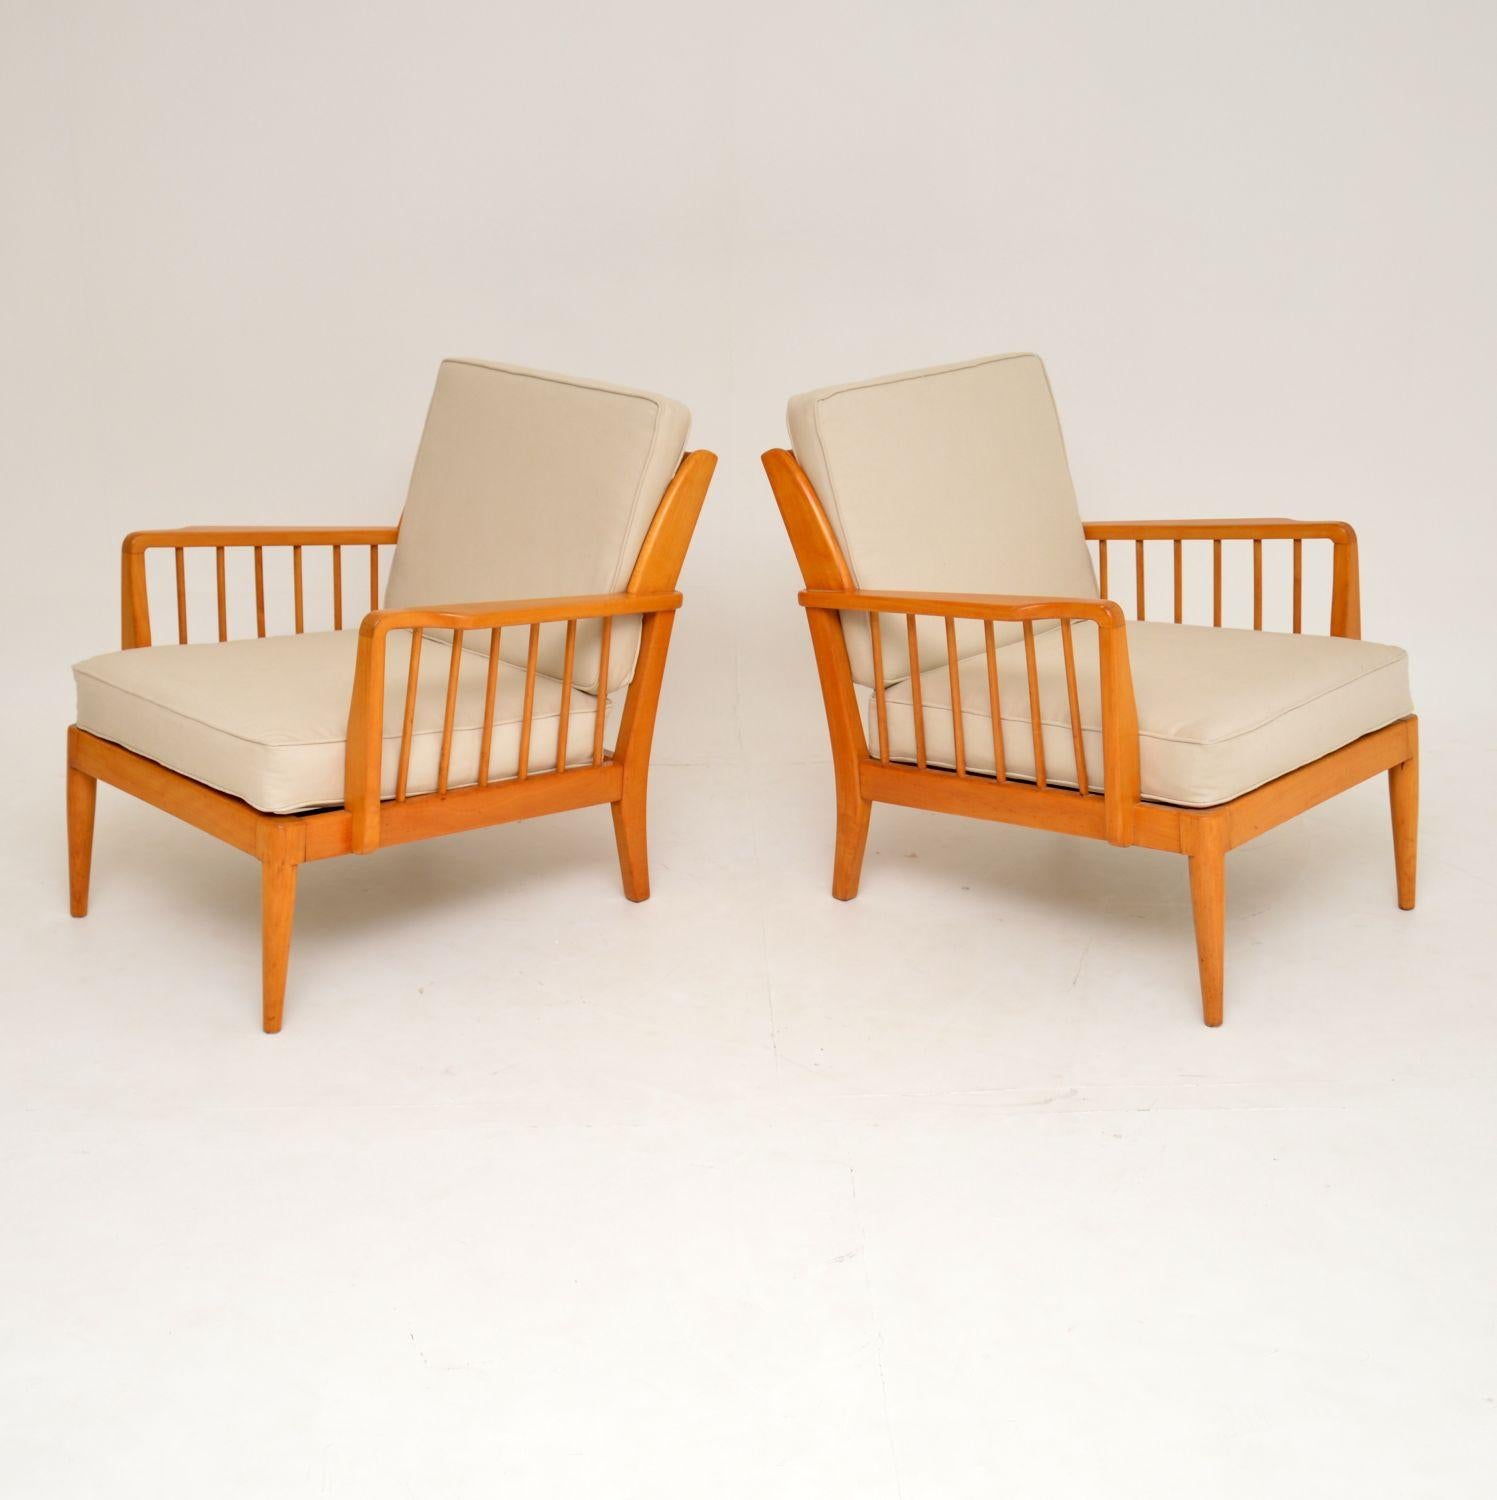 A stylish and very comfortable pair of vintage armchairs. These were made by George Stone of High Wycombe, they date from the 1950s-1960s. The condition is superb throughout, they have been fully restored. The frames have been stripped and